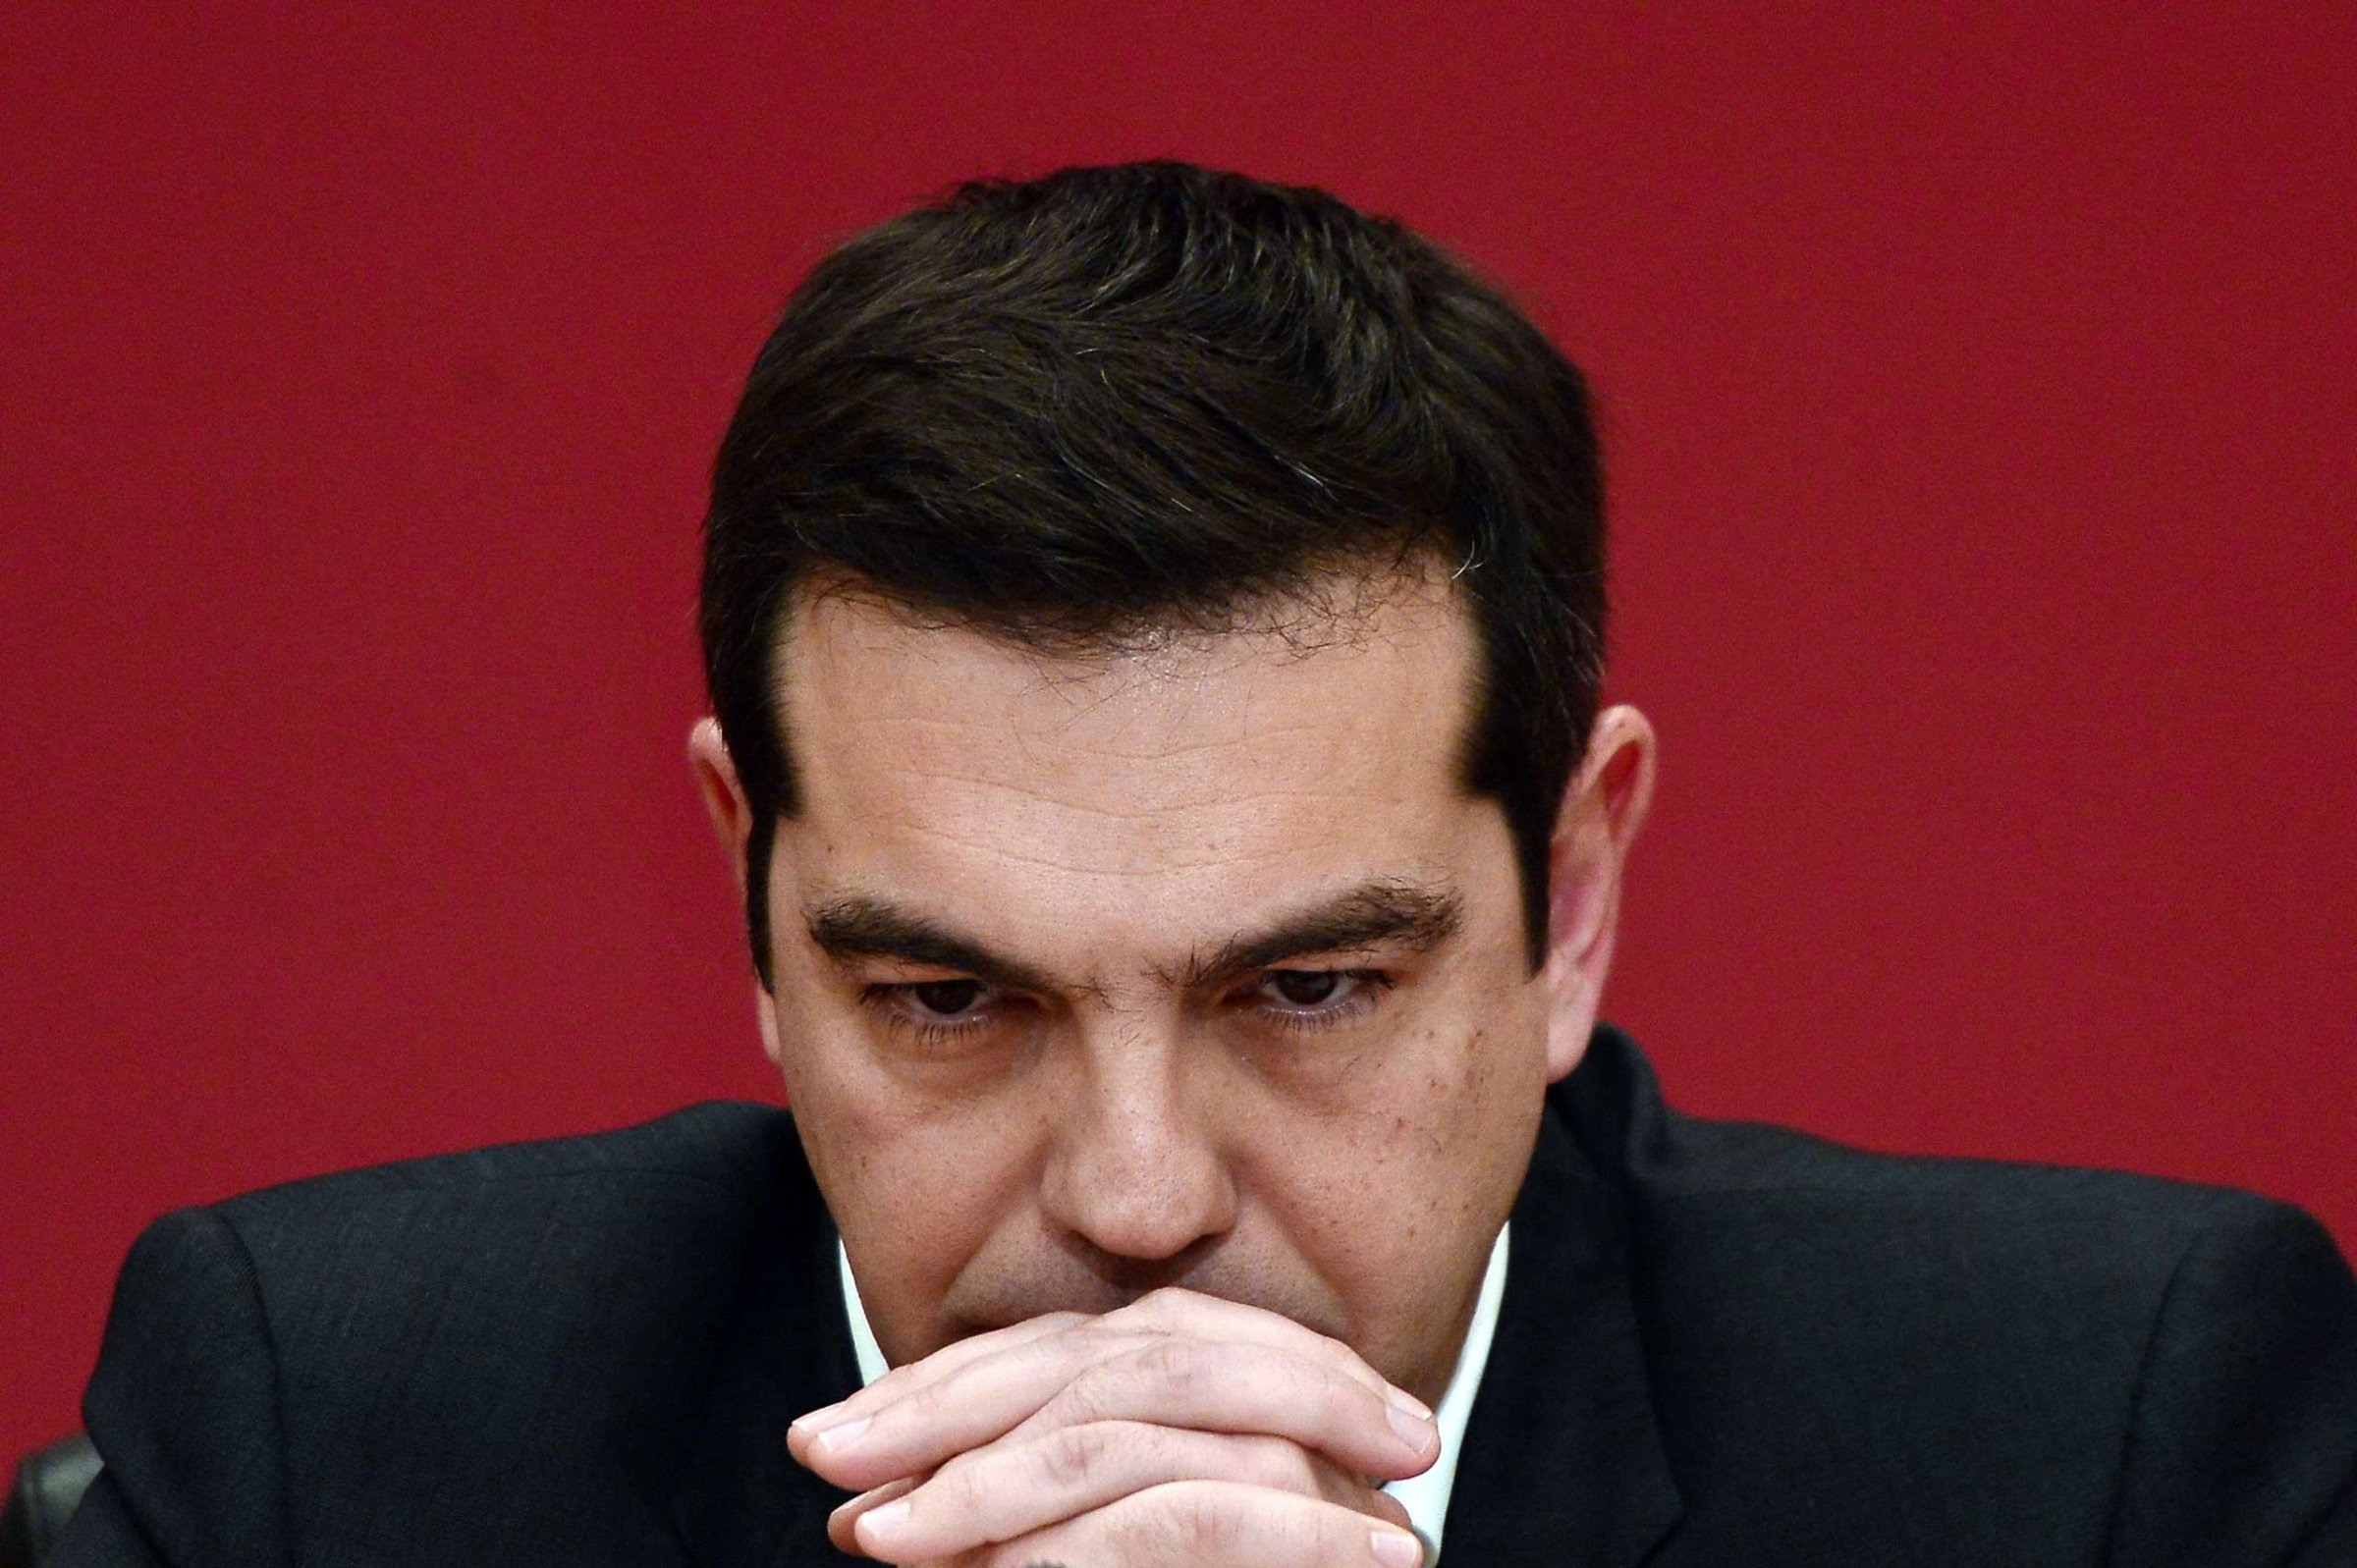 The leader of Syriza party, Alexis Tsipras, listens to a question during a televised press conference on Jan. 23, 2015 at the Zappion Hall in Athens.